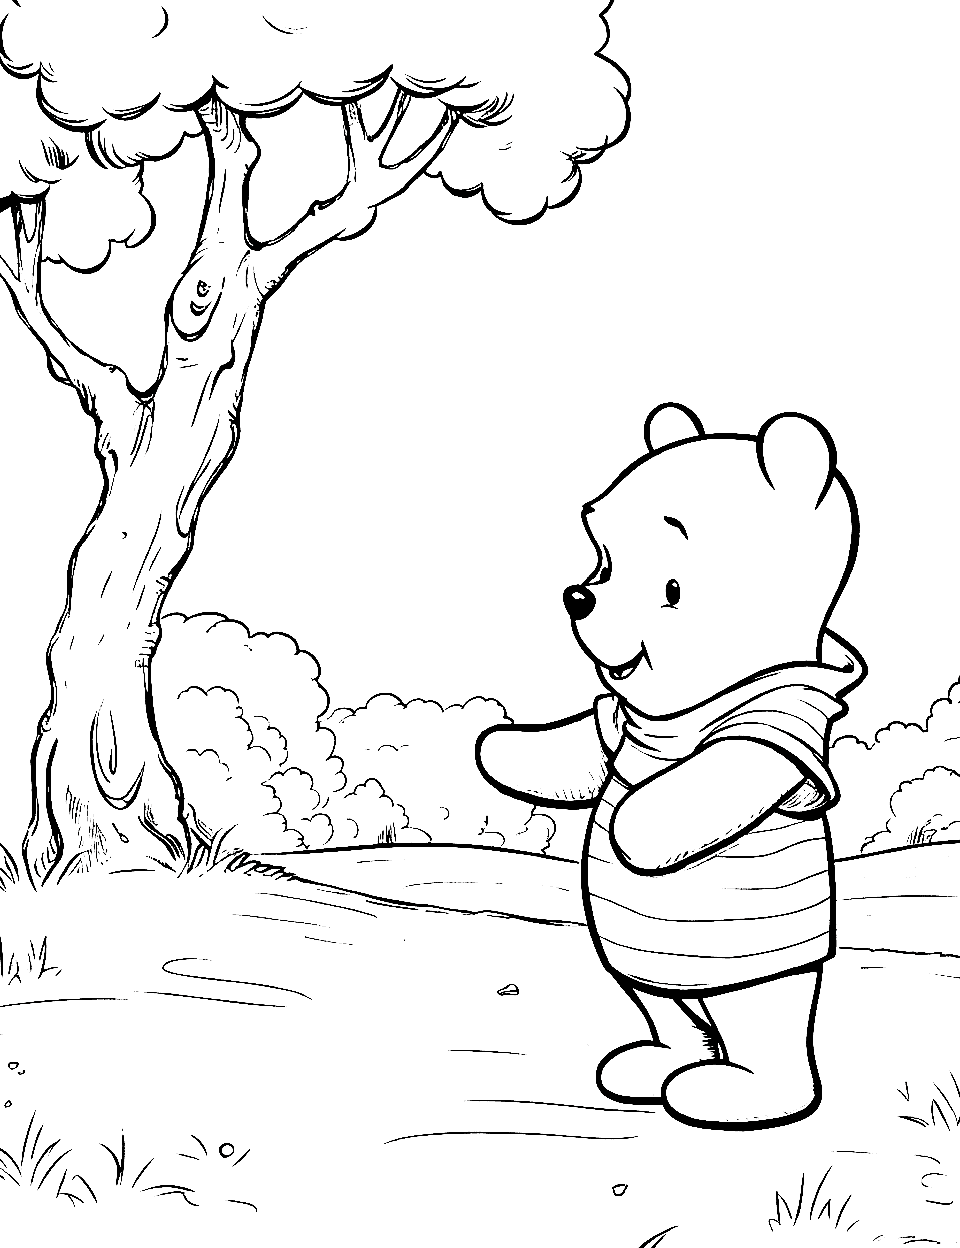 Original Adventure Coloring Page - Winnie the Pooh outside for an exciting adventure.